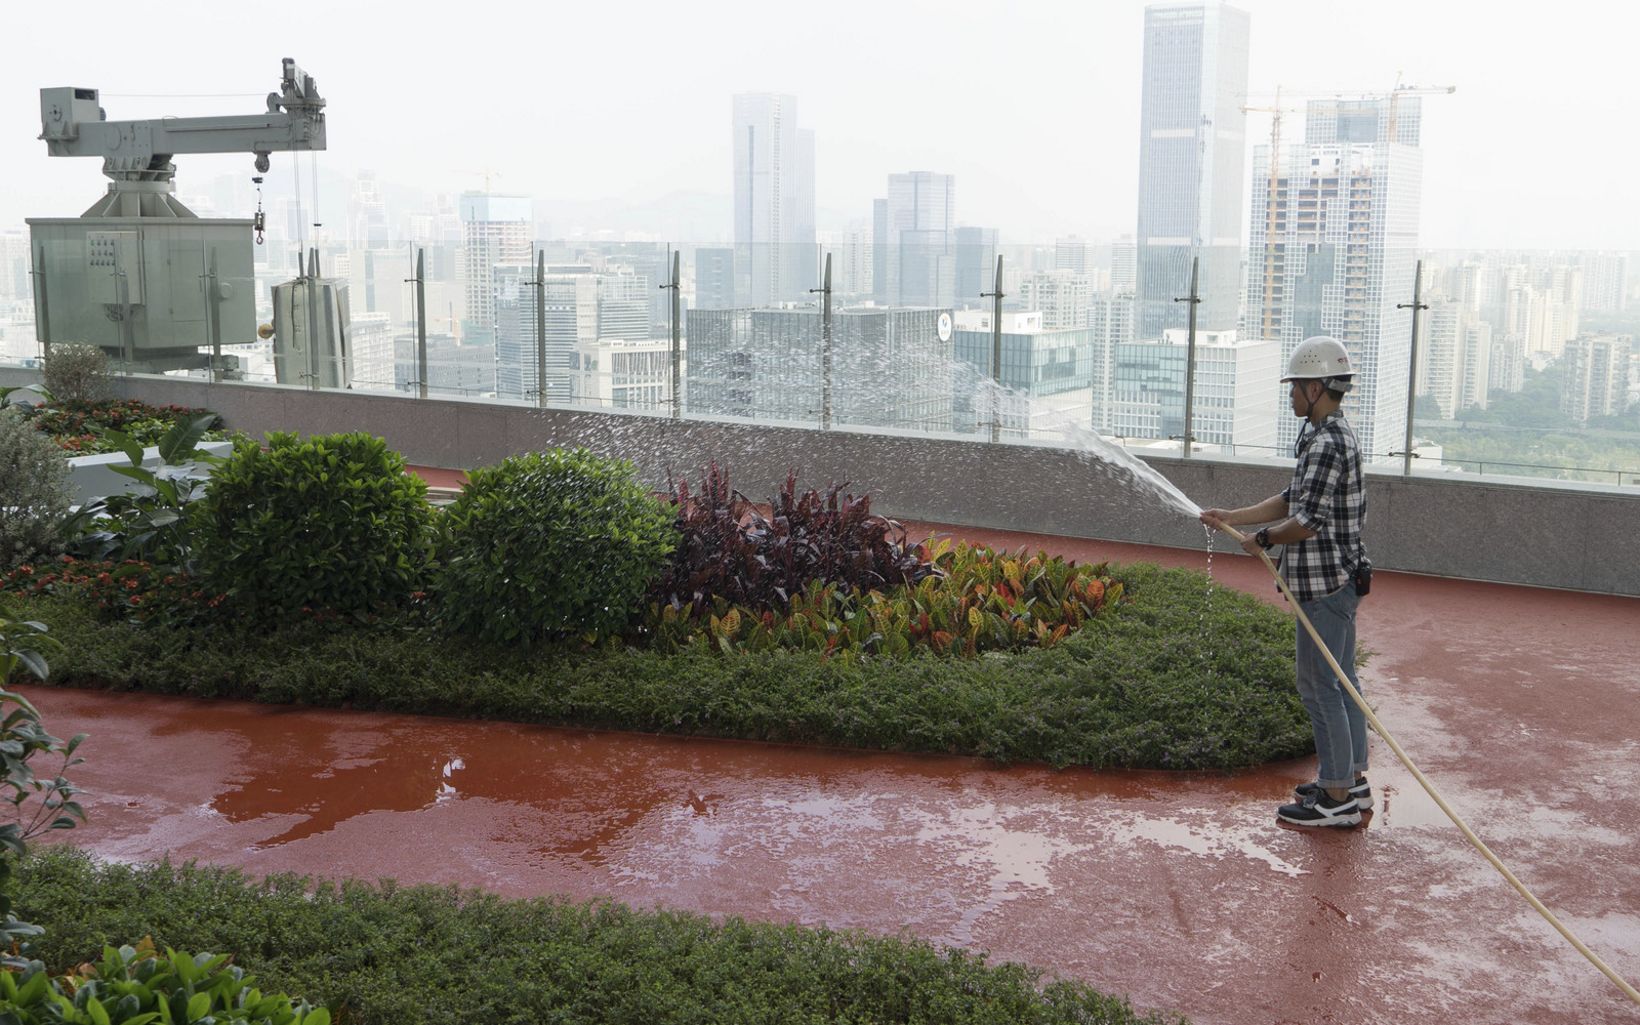 An employee waters the rooftop garden on the rooftop garden on the Tencent Binhai towers in Shenzhen, China.